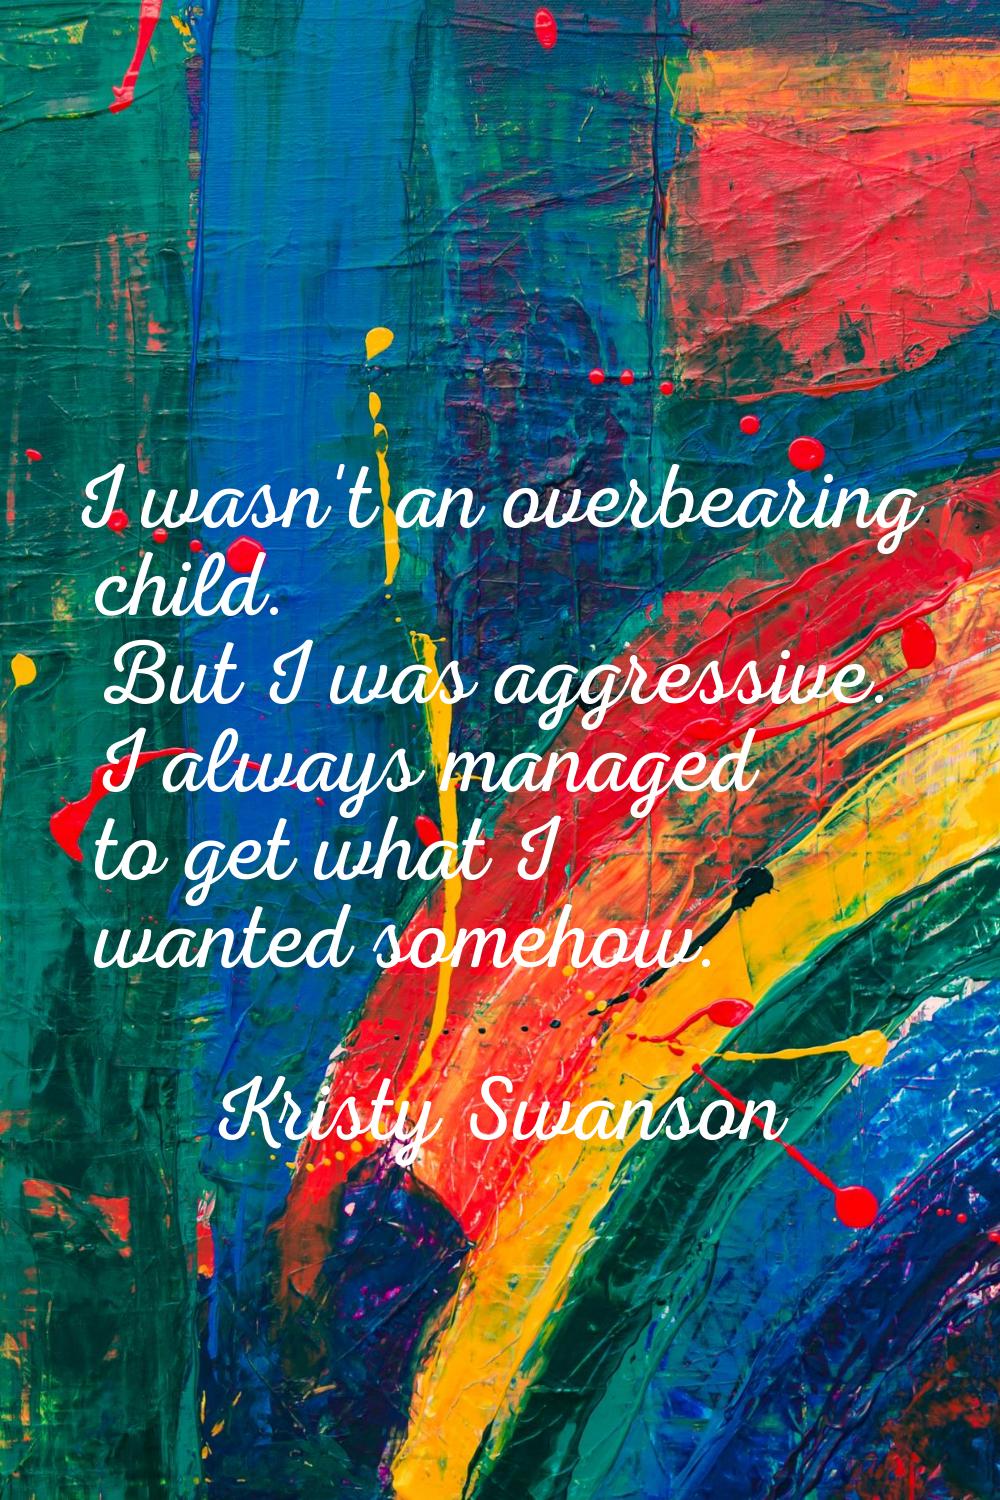 I wasn't an overbearing child. But I was aggressive. I always managed to get what I wanted somehow.